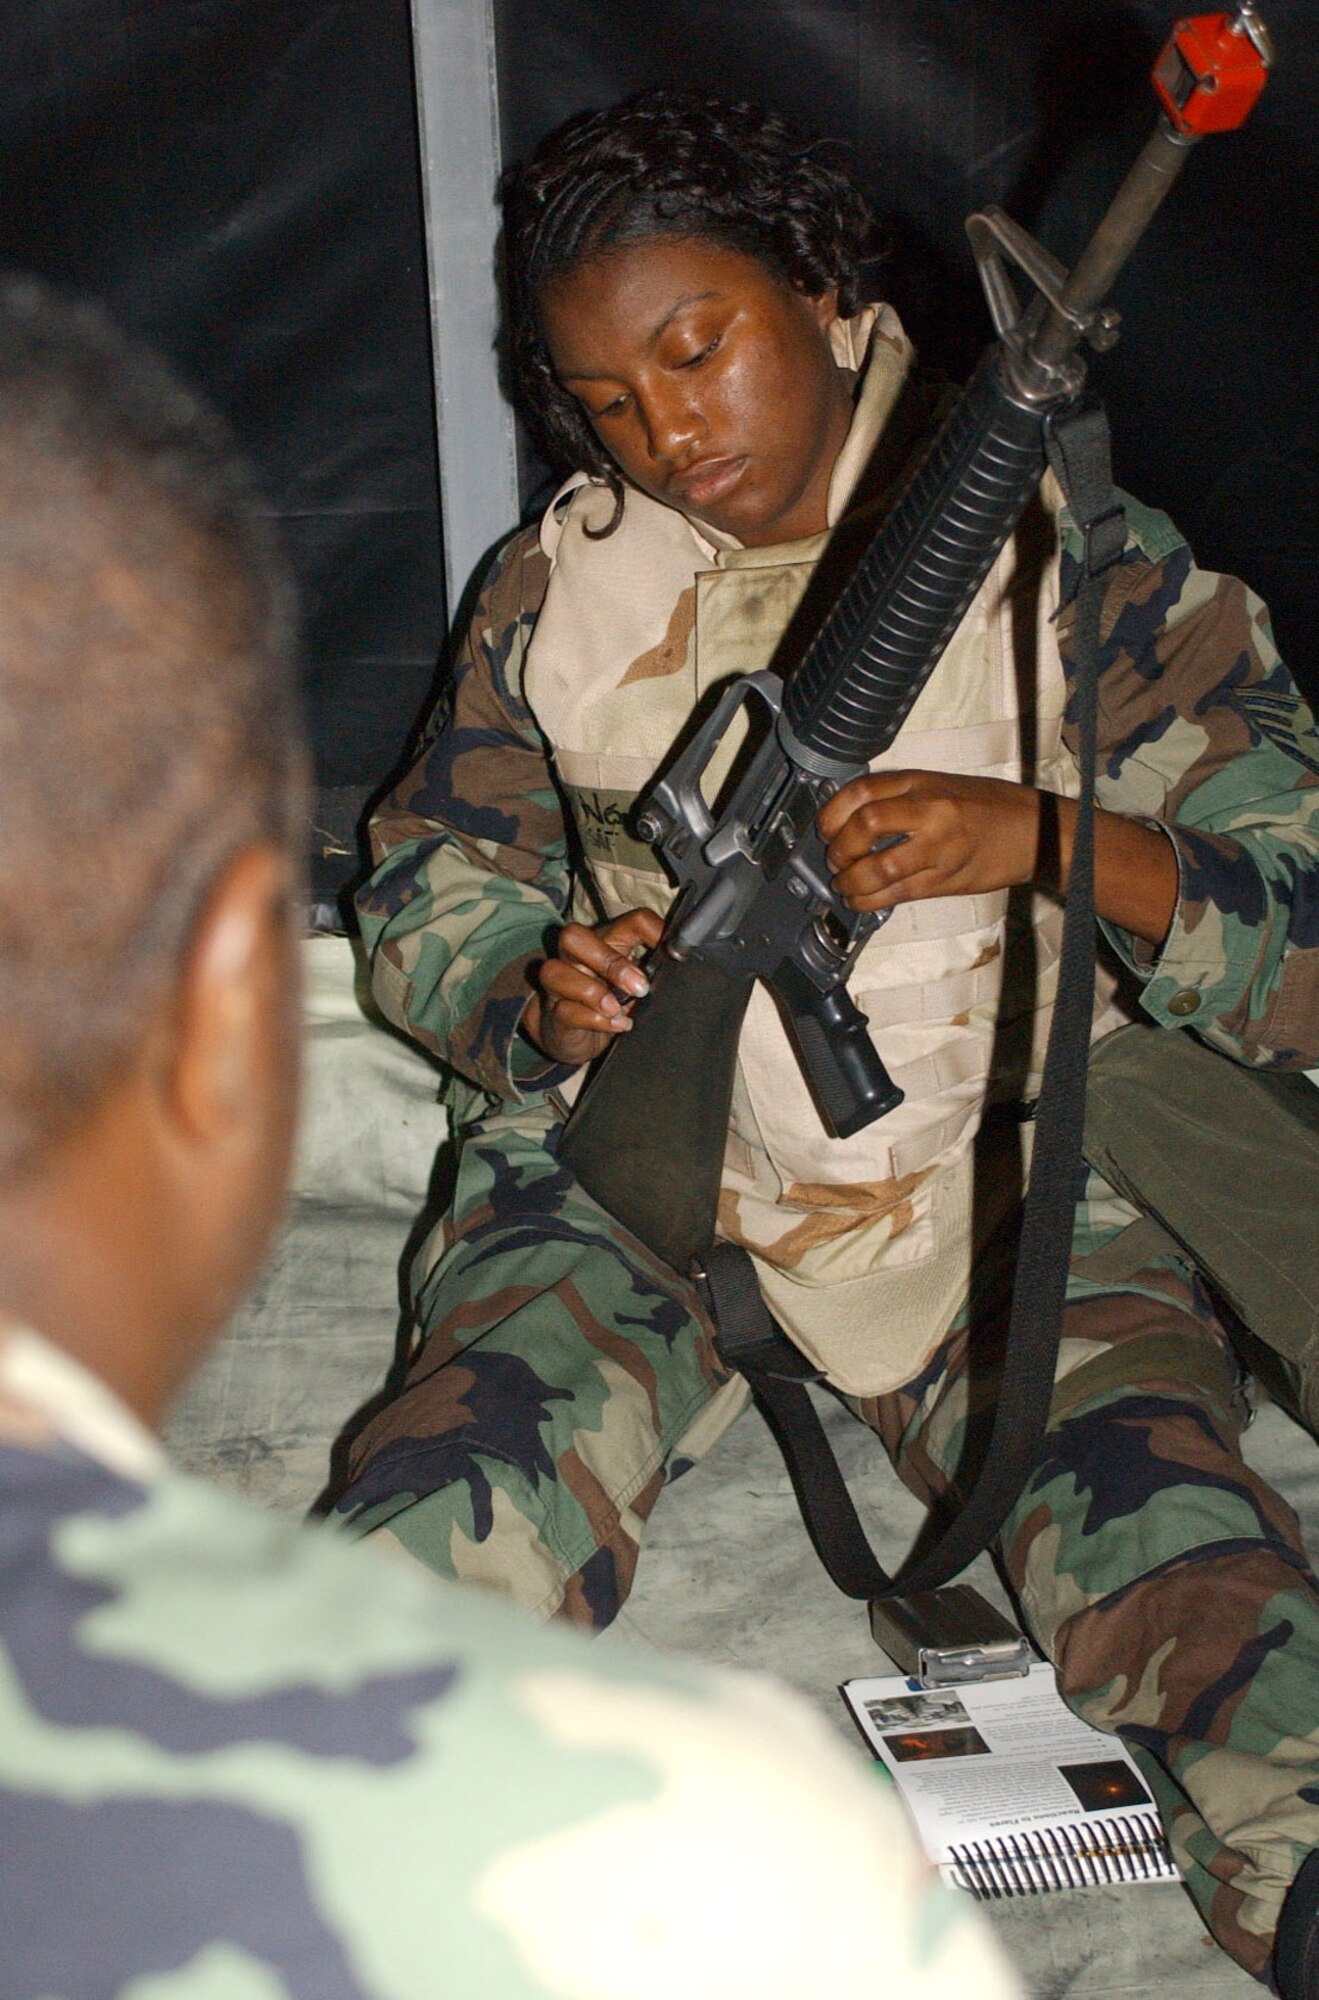 Staff Sgt. Phillip Belle, left, 81st Security Forces Squadron, instructs Staff Sgt. Lashundra Nesmith, legal office, on the proper handling of an M-16 during the contingency exercise.  (U.S. Air Force photo by Kemberly Groue)